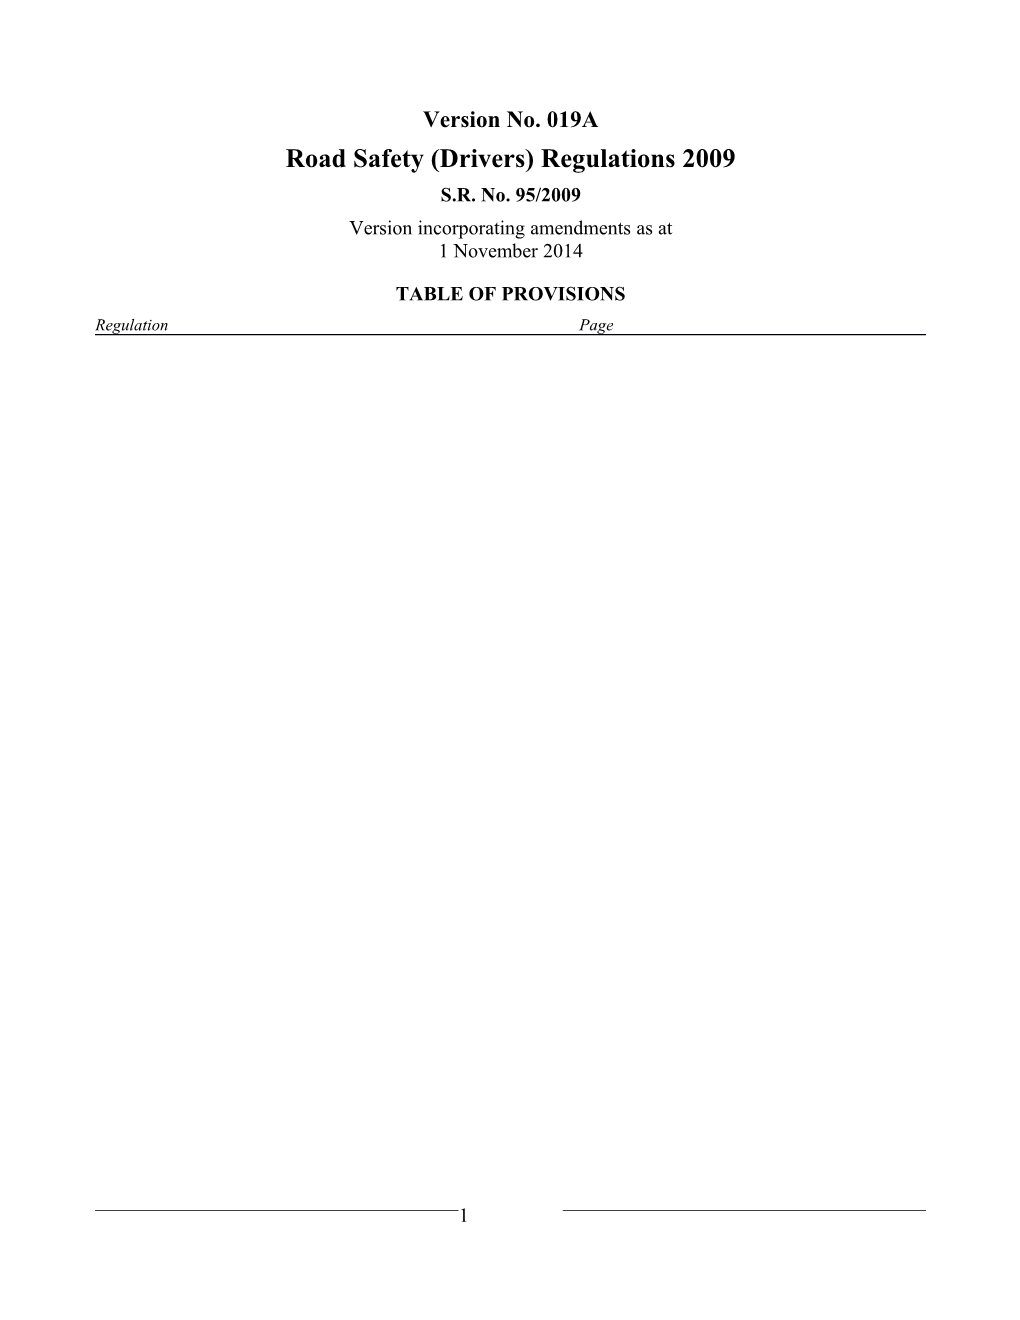 Road Safety (Drivers) Regulations 2009